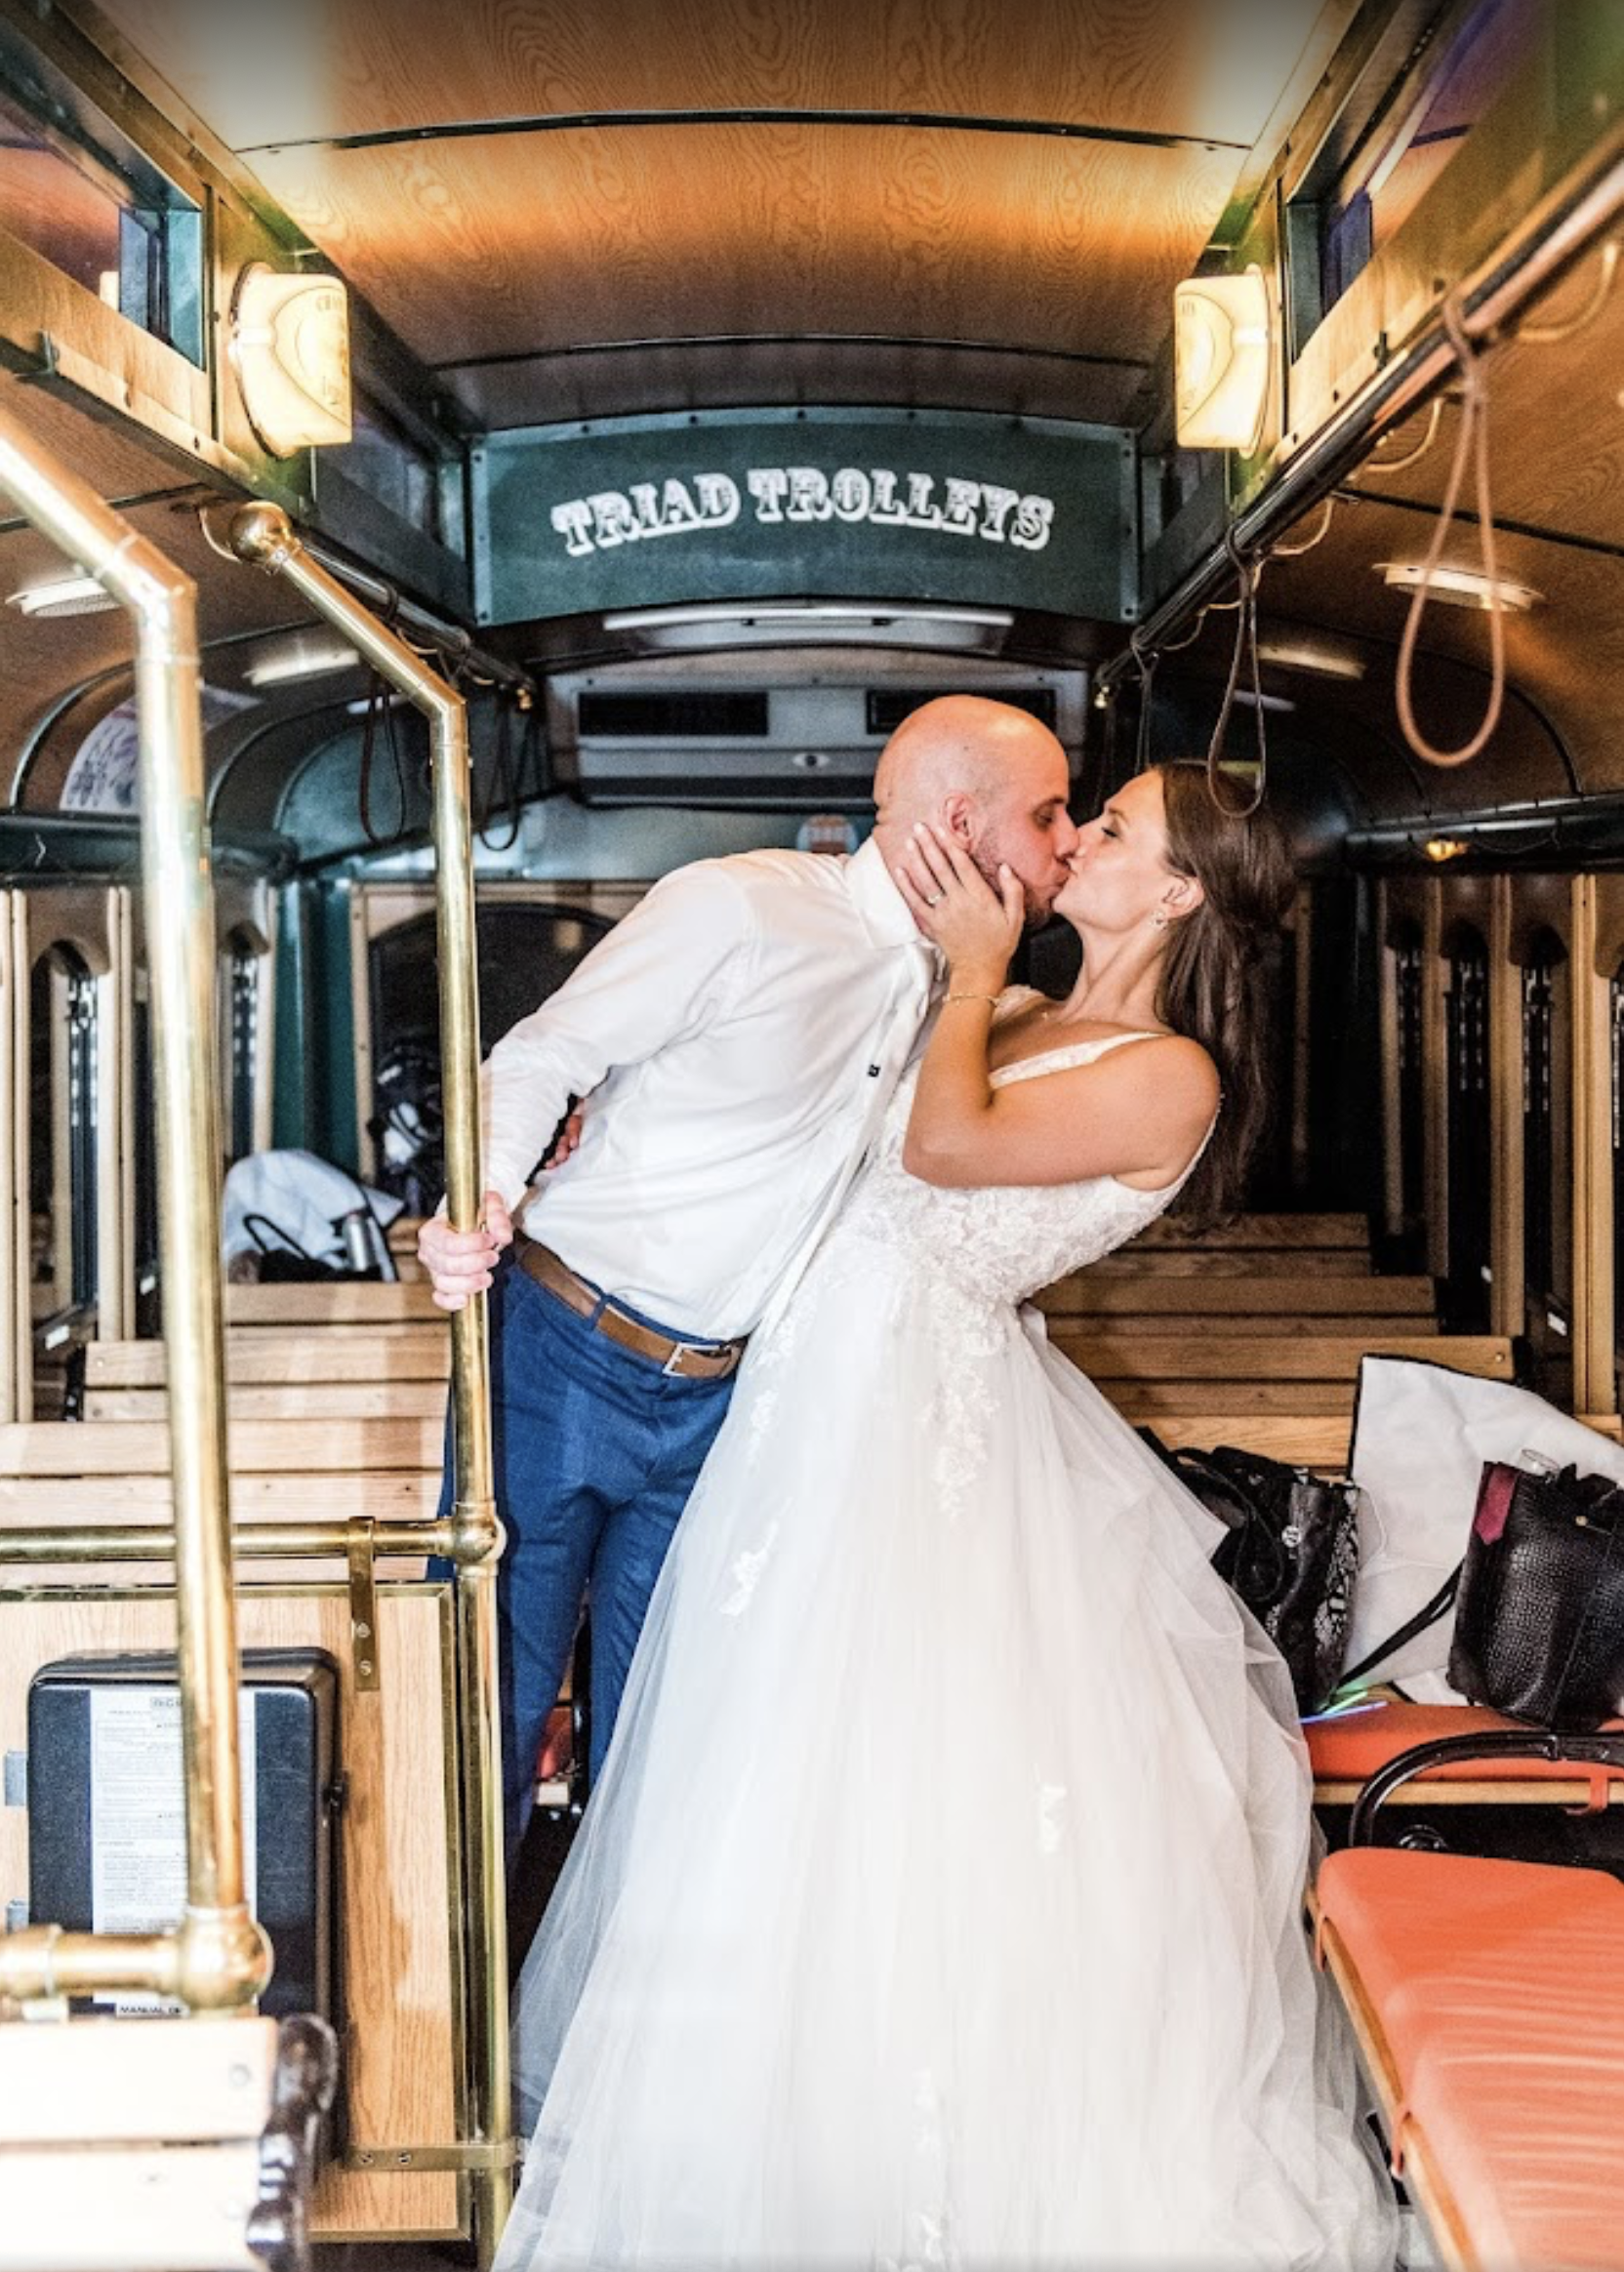 Bride and groom in Trolly